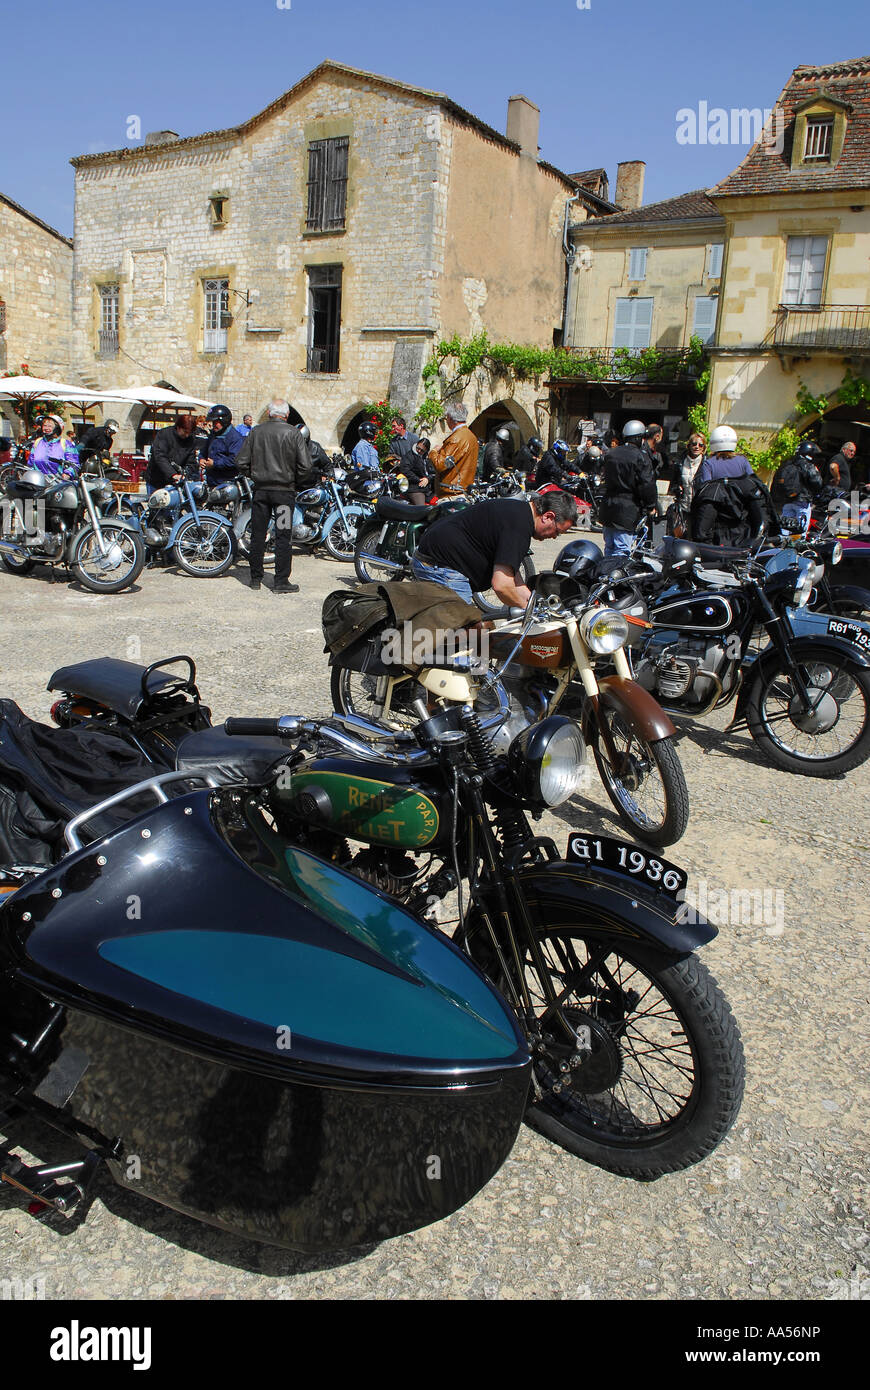 Classic Motorcycle Rally, Monpazier, dordogne, france Banque D'Images